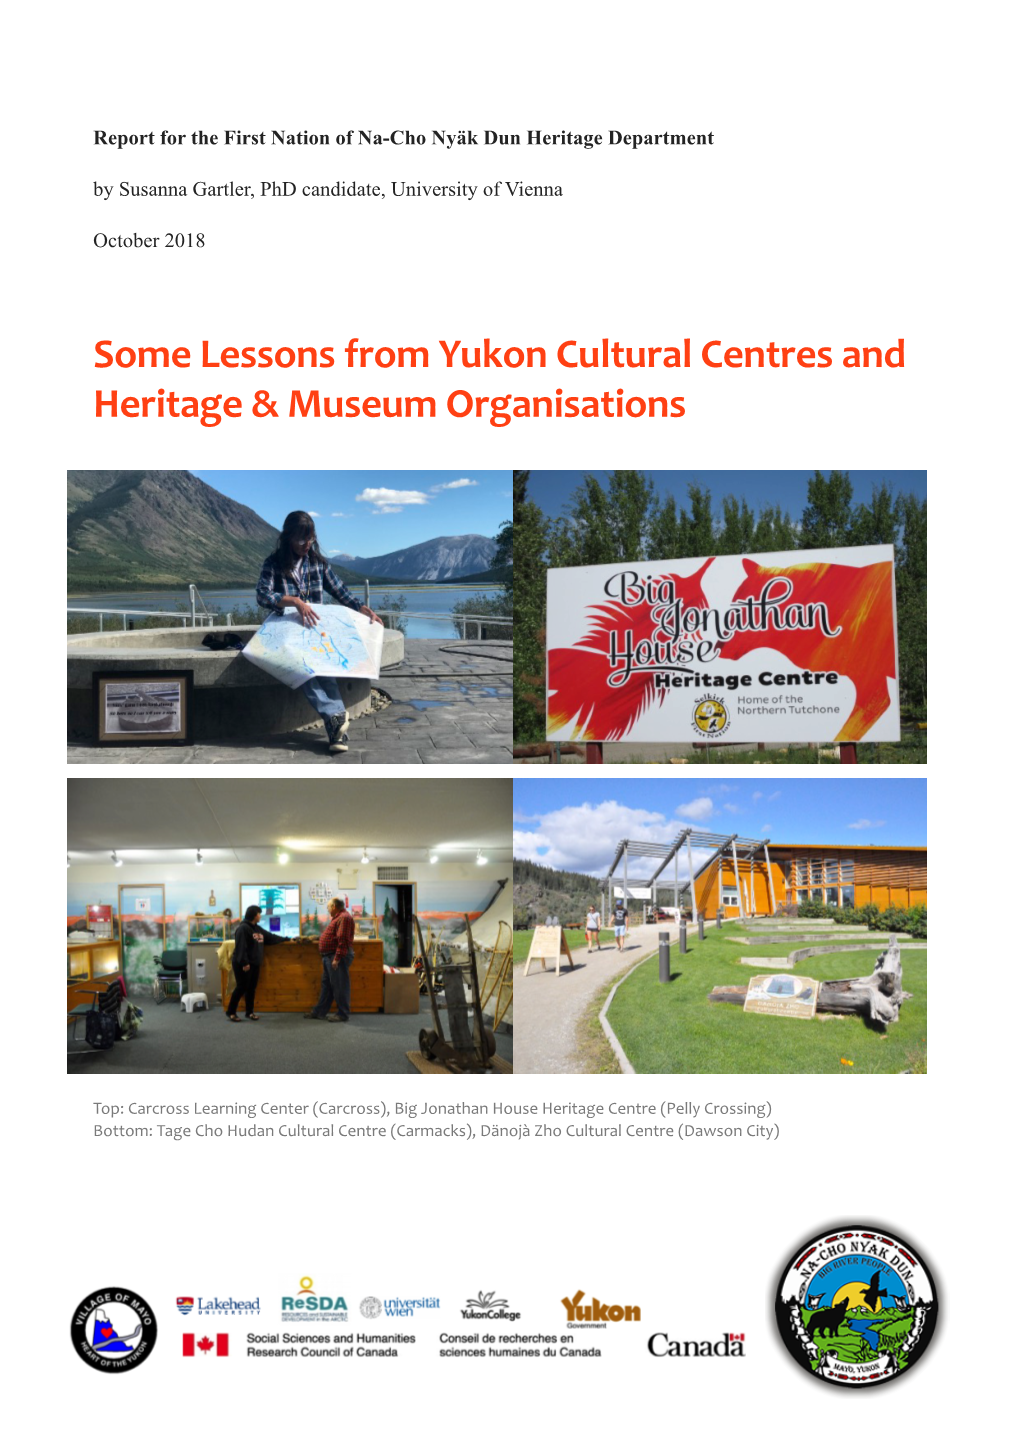 Some Lessons from Yukon Cultural Centres and Heritage & Museum